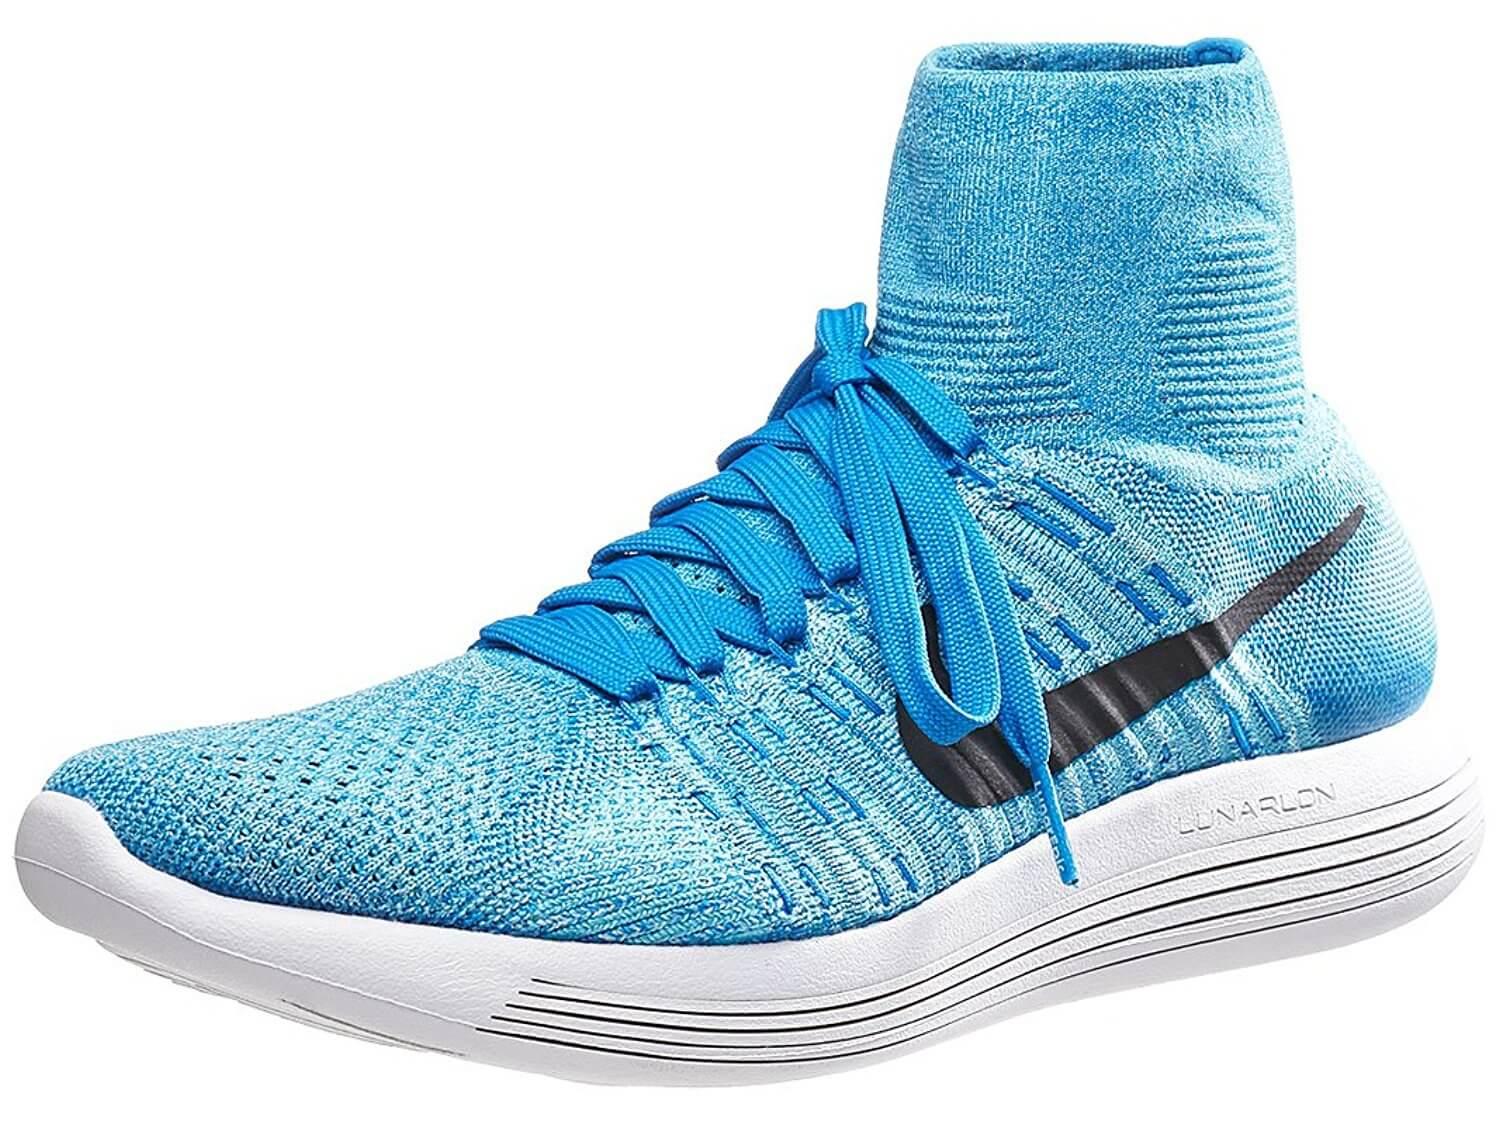 The Nike LunarEpic Flyknit is another fashionable and functional Nike running shoe.